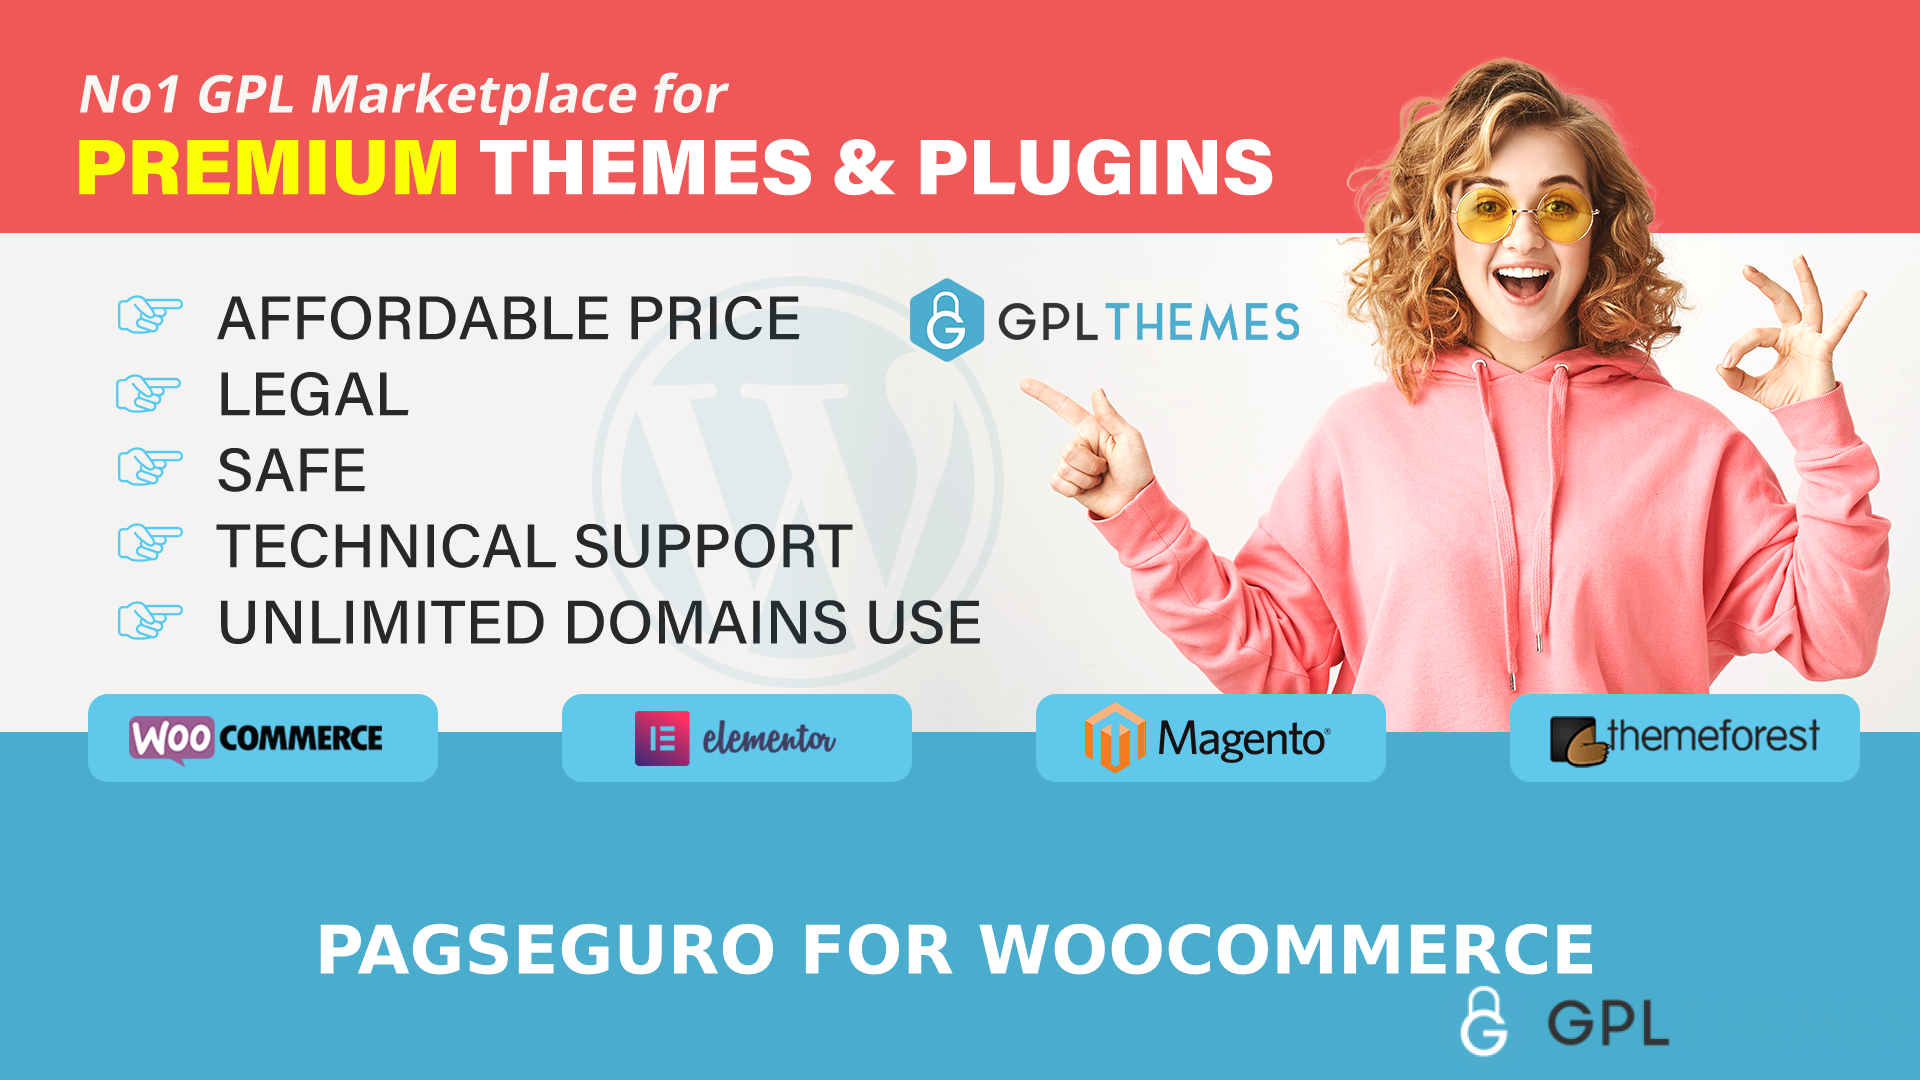 PagSeguro for WooCommerce